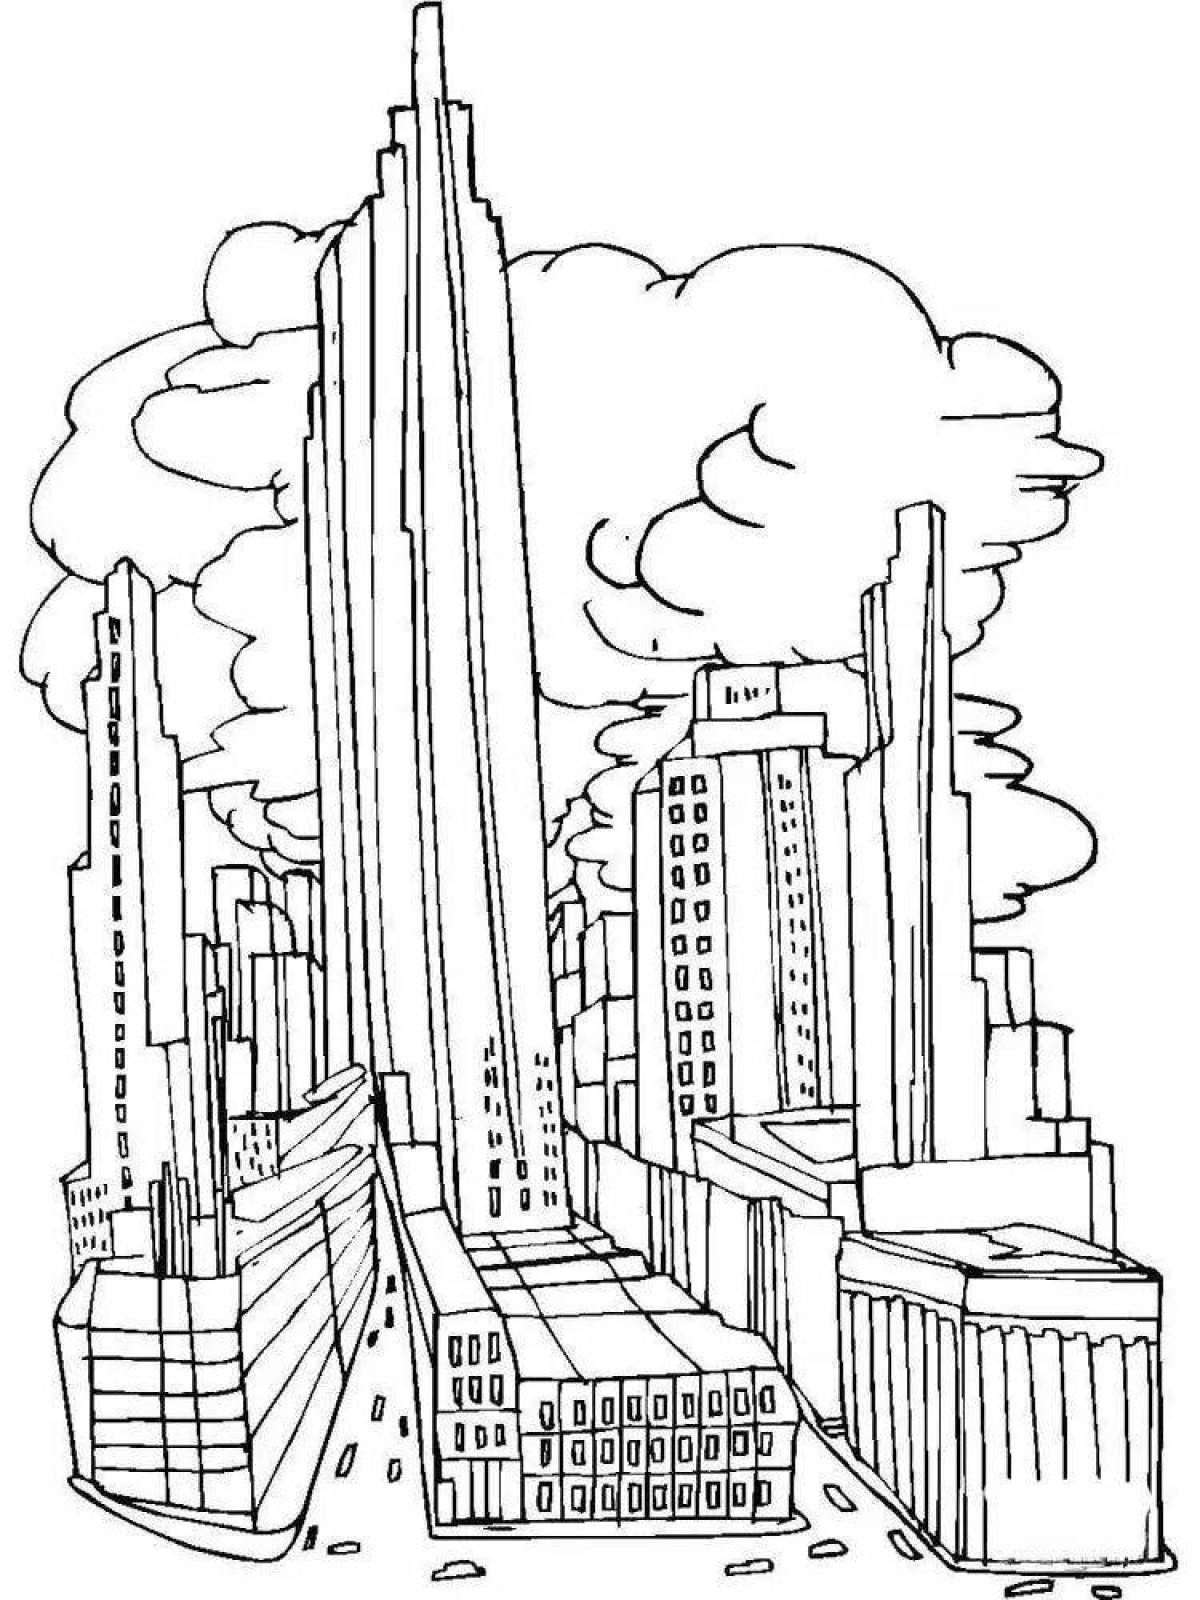 Fearless future coloring page